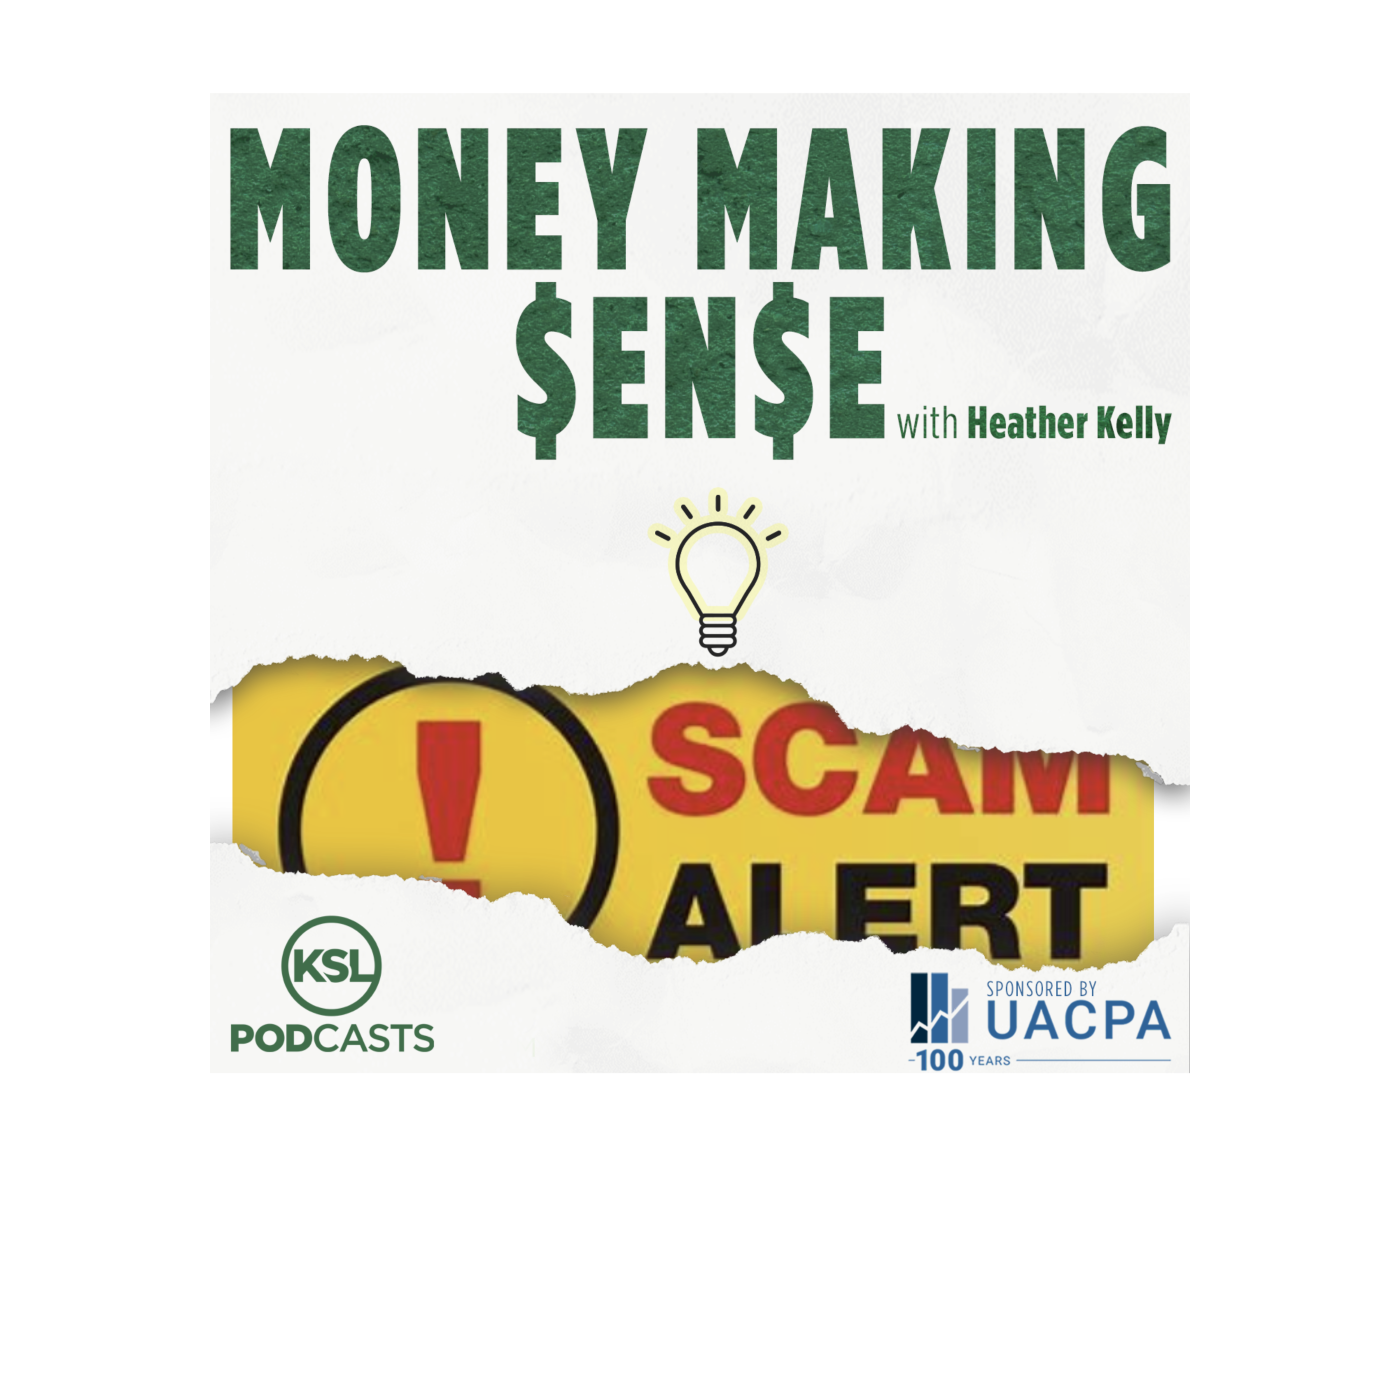 How to identify text and email scams